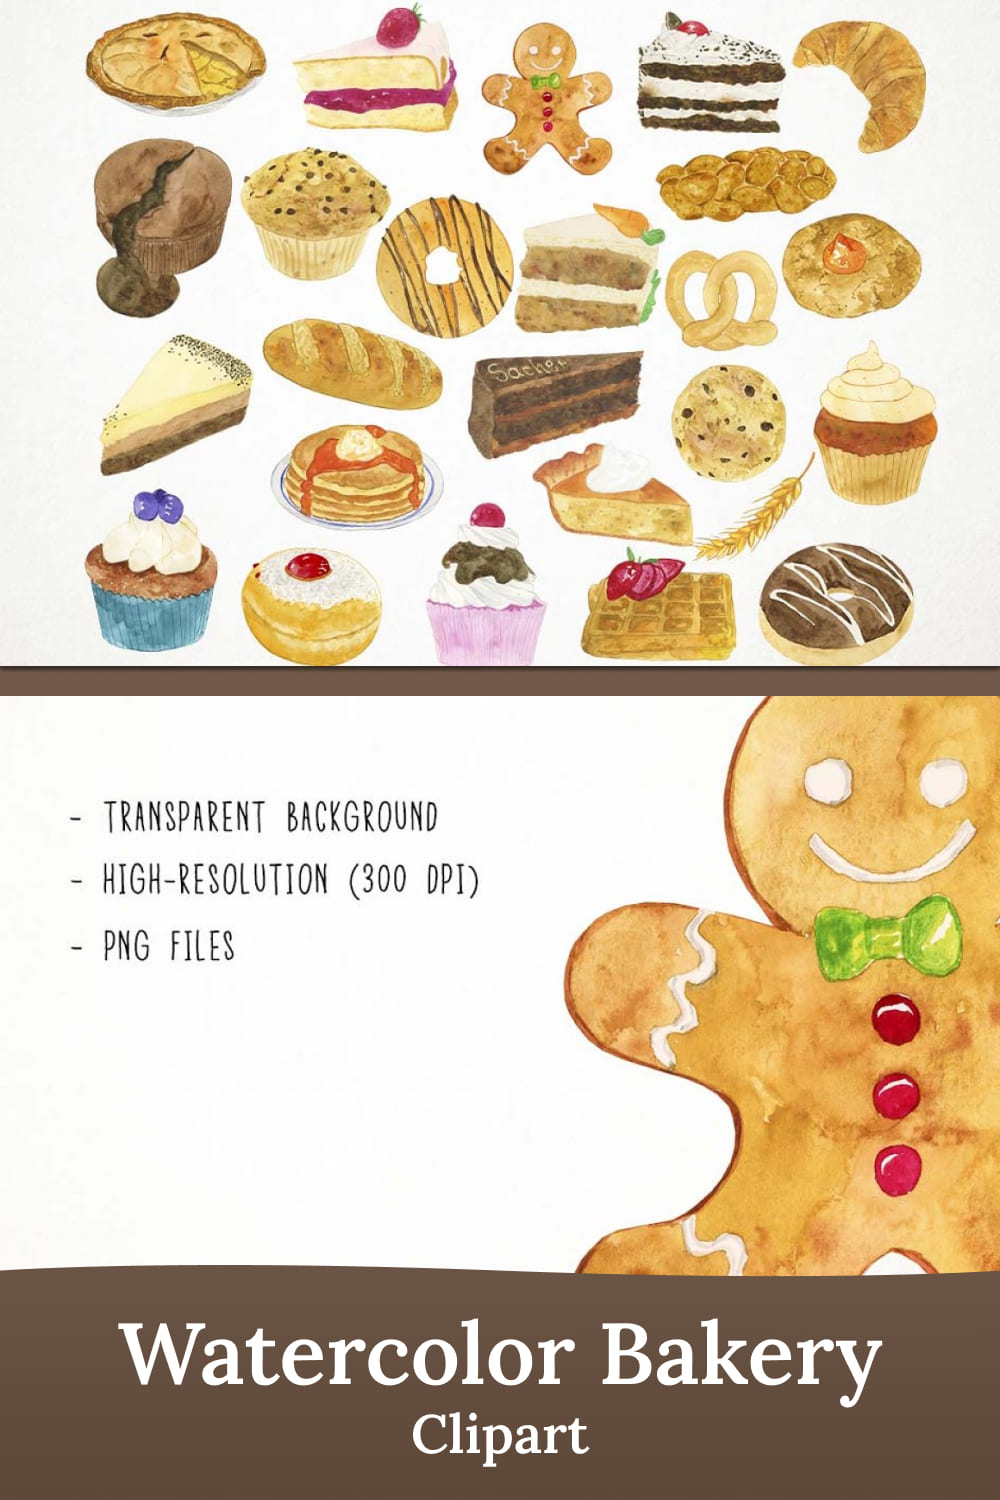 Watercolor bakery clipart - pinterest image preview.